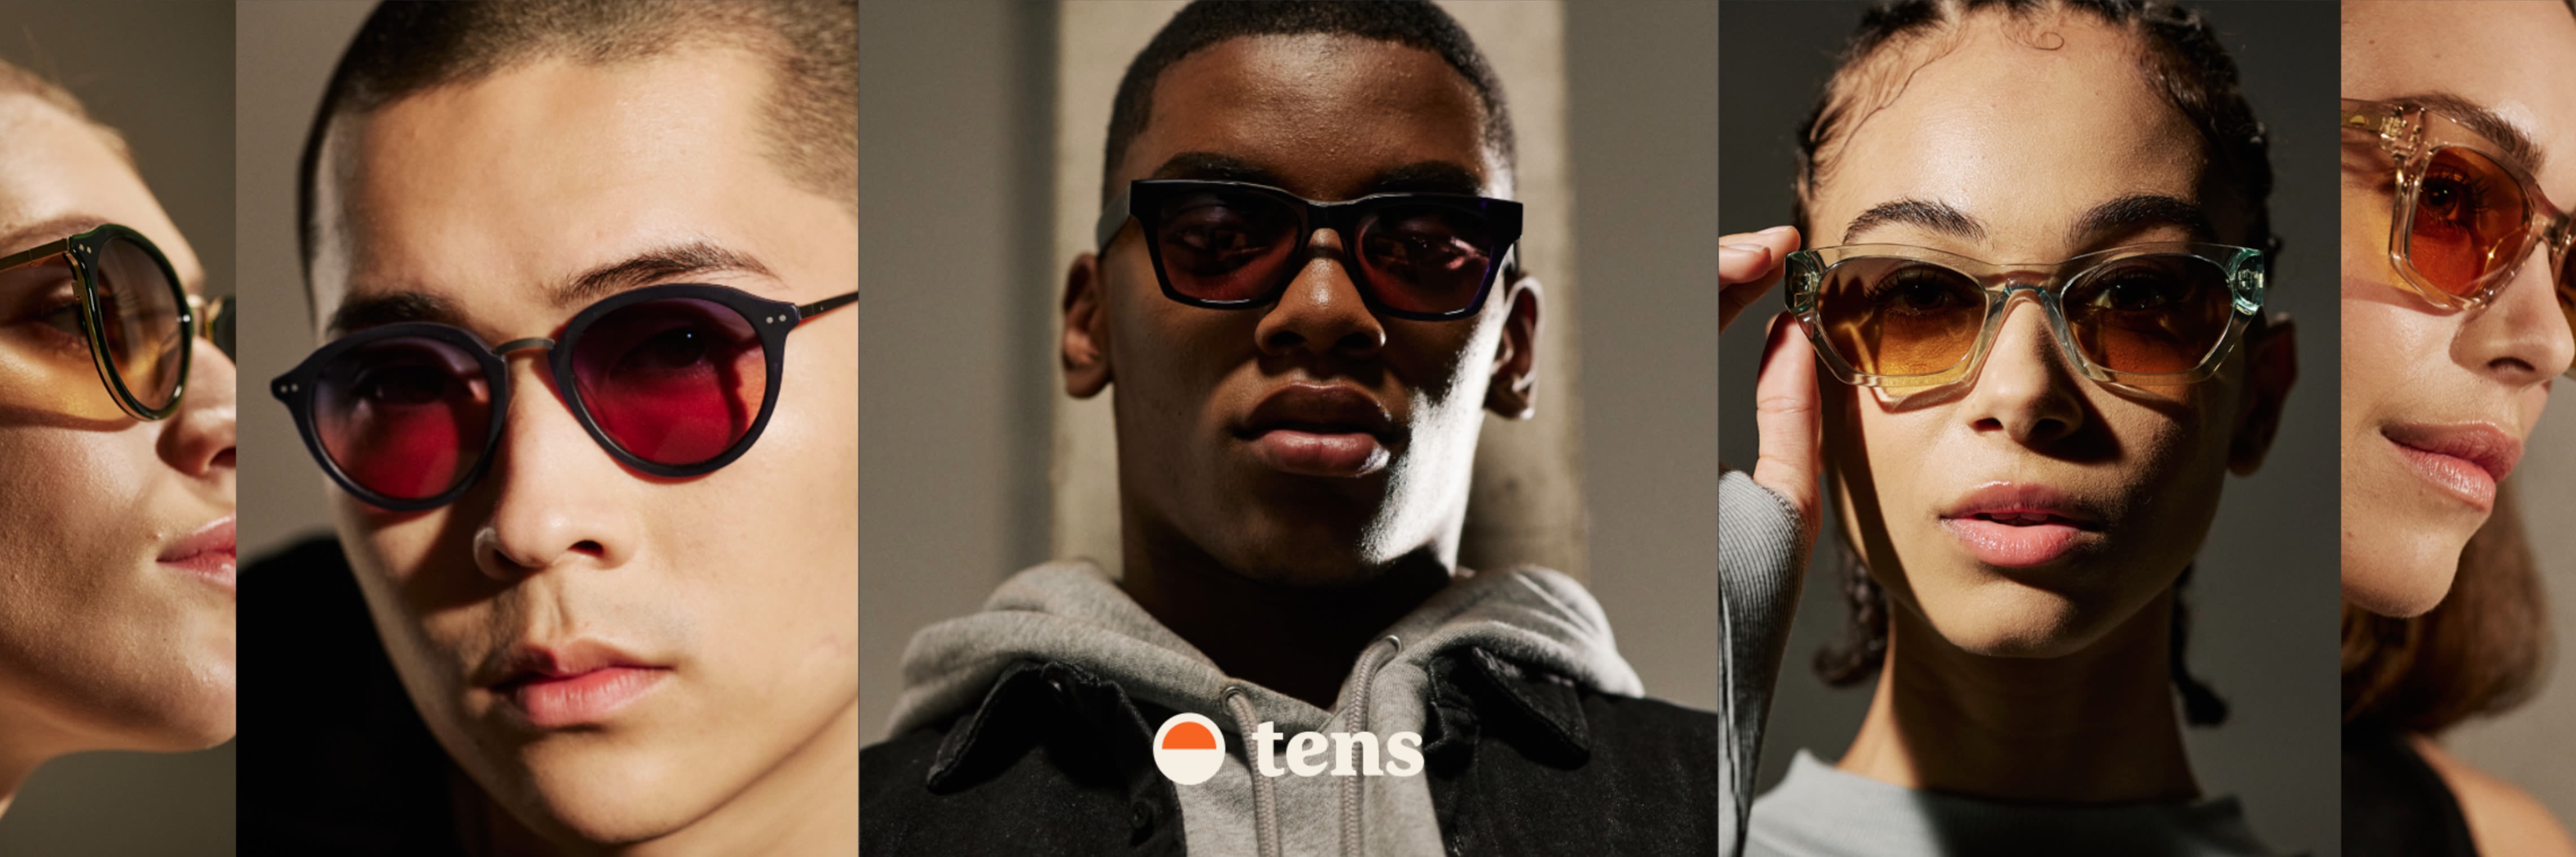 Tens 2021 sunglasses collection